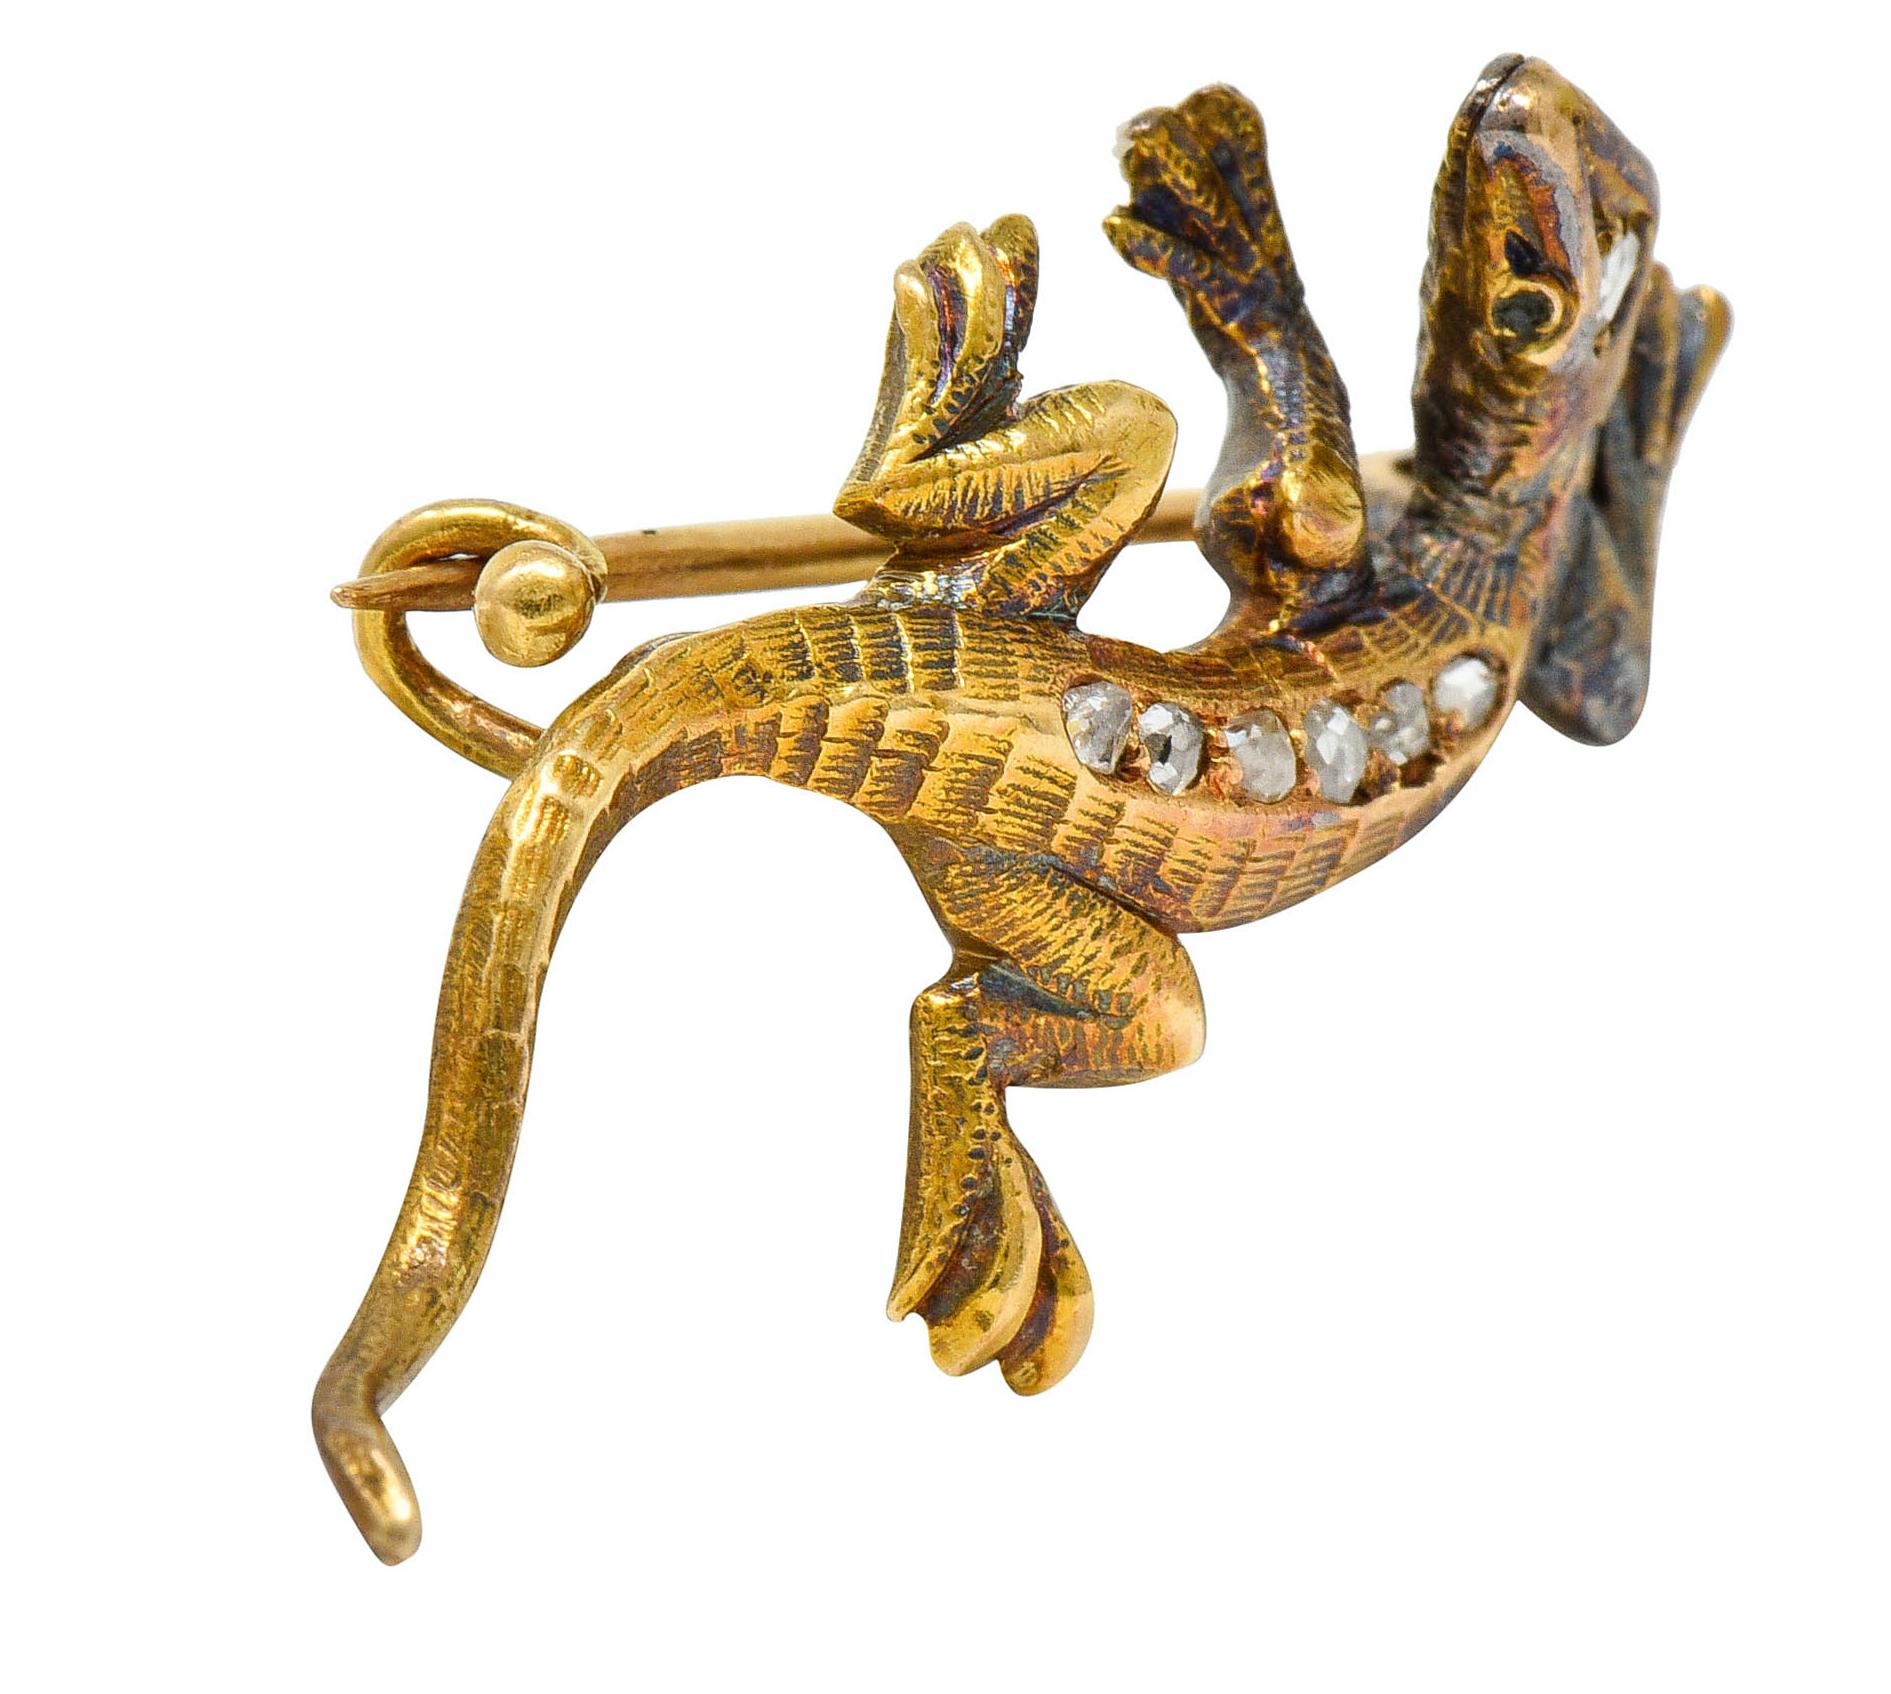 Designed as a small but animated lizard

With hatched lines and a ridged texture

Accented by rose cut diamonds weighing approximately 0.12 carat

Completed by a pin stem with closure

Tested as 18 karat gold

Circa: 1880s

Measures: 11/16 x 1 1/4